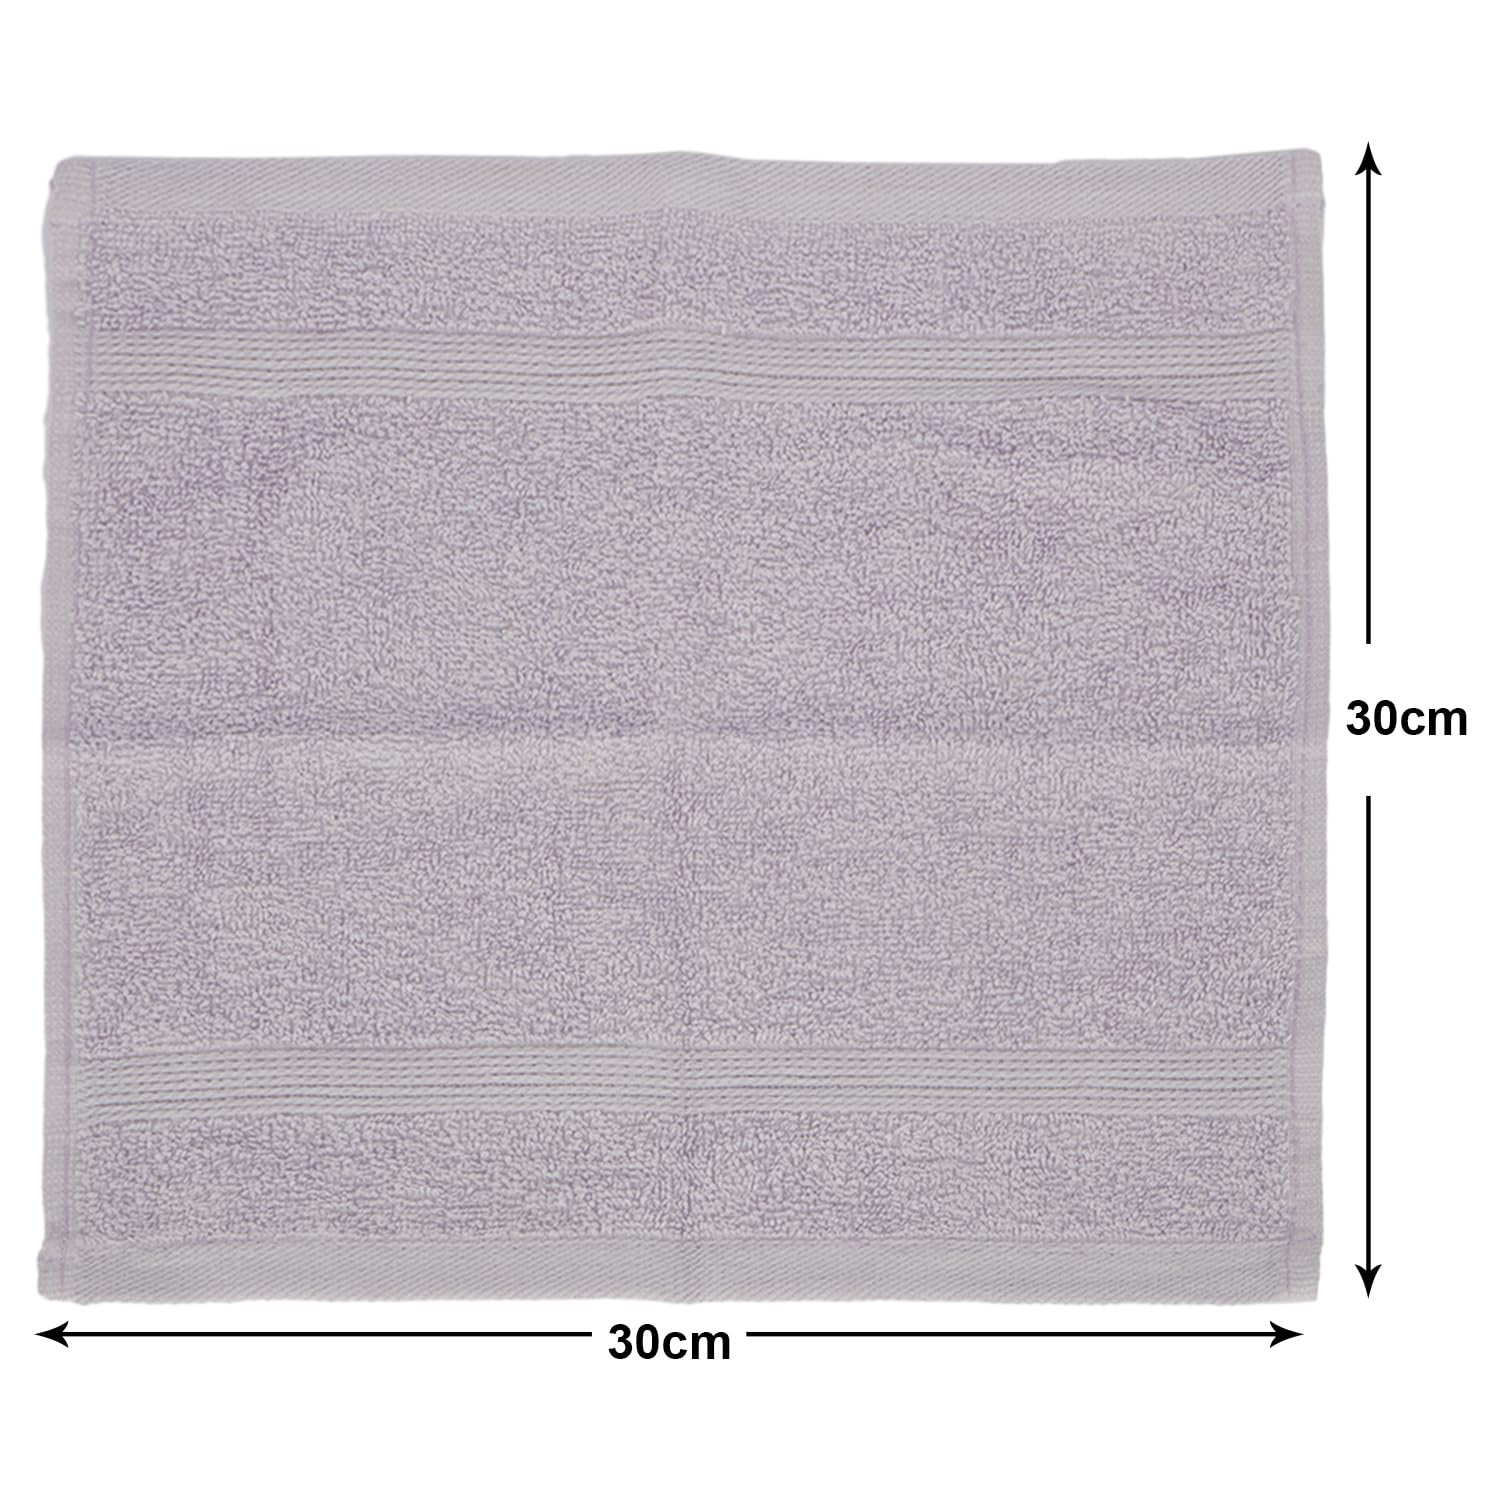 Kuber Industries 525 GSM Cotton Face towels |Super Soft, Quick Absorbent & Anti-Bacterial|Gym & Workout Towels|Pack of 2 (Purple & Mauve)